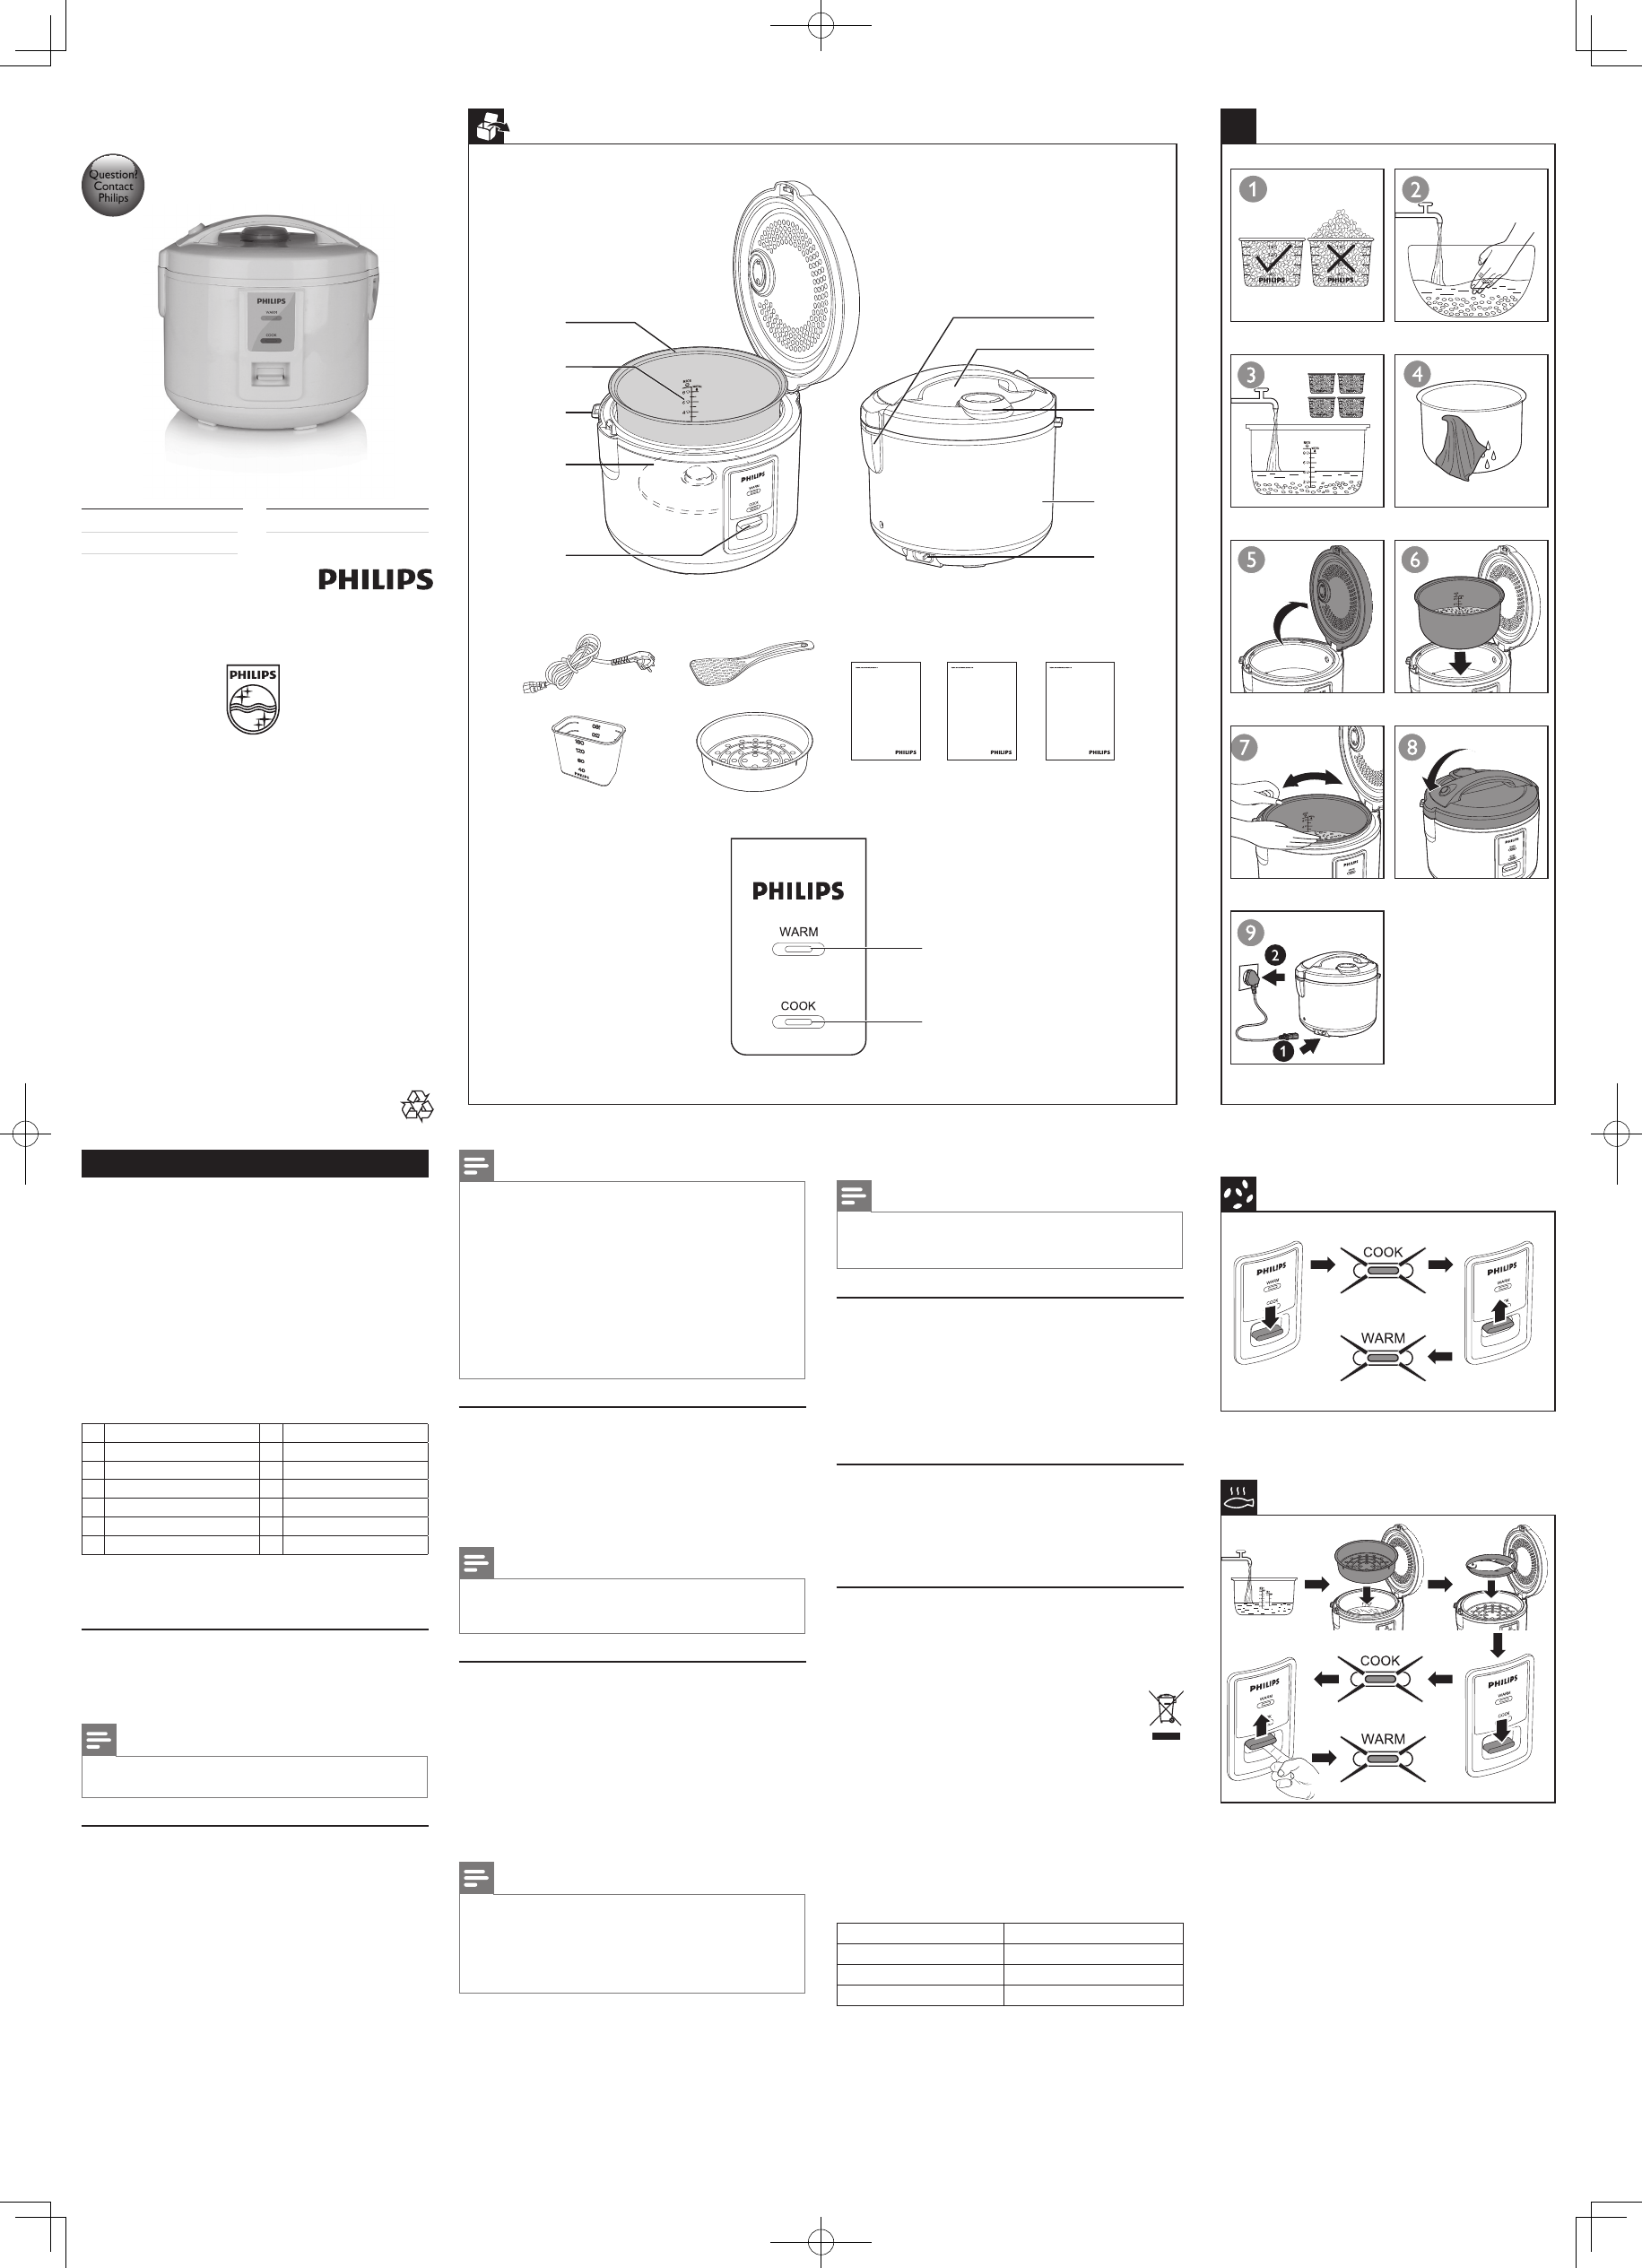 Verzorger Raad Monopoly Manual Philips HD3015 (page 1 of 2) (English, Dutch, French)